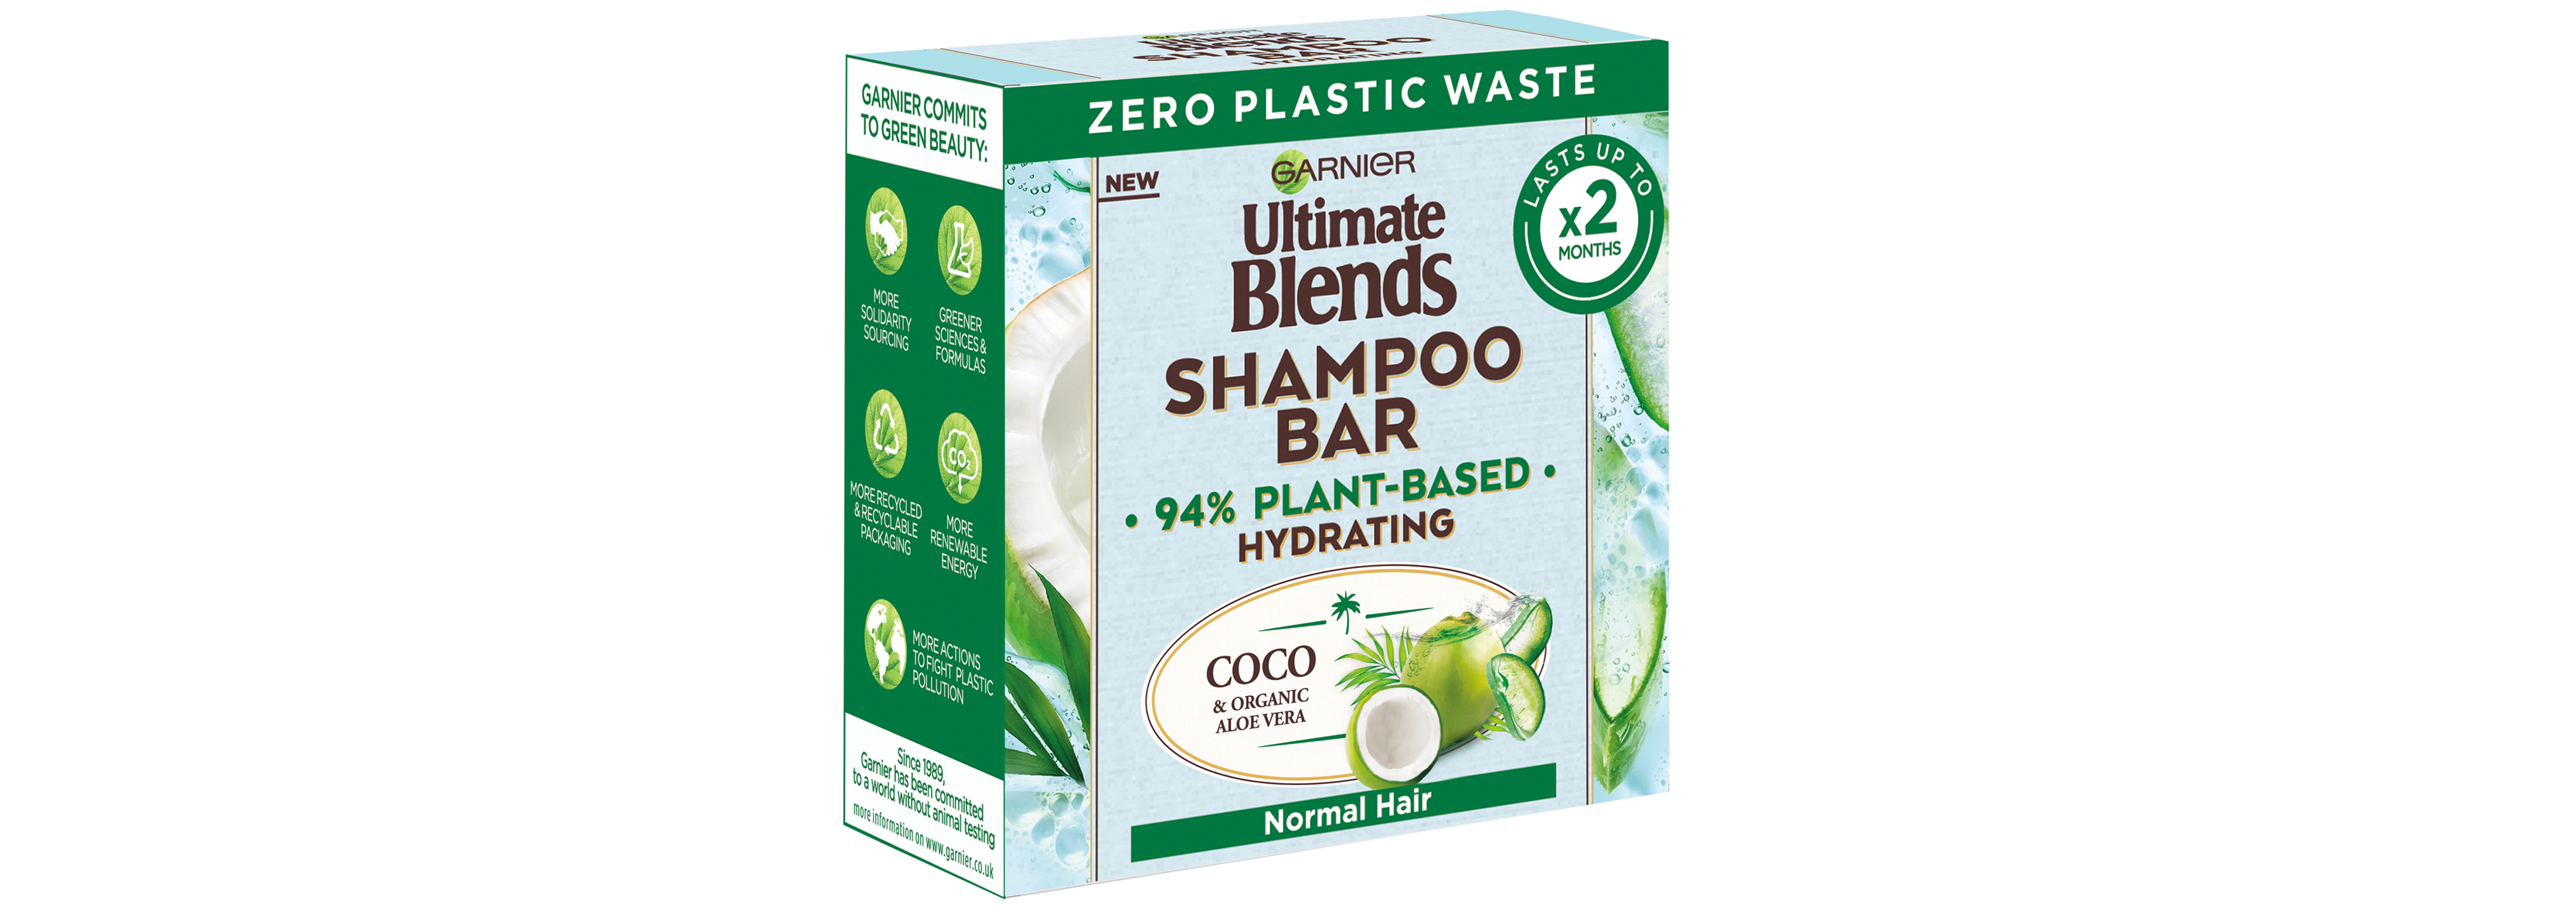 Garnier Ultimate Blends Coconut Hydrating Shampoo Bar with Aloe Vera for Normal Hair, £3.99, Boots